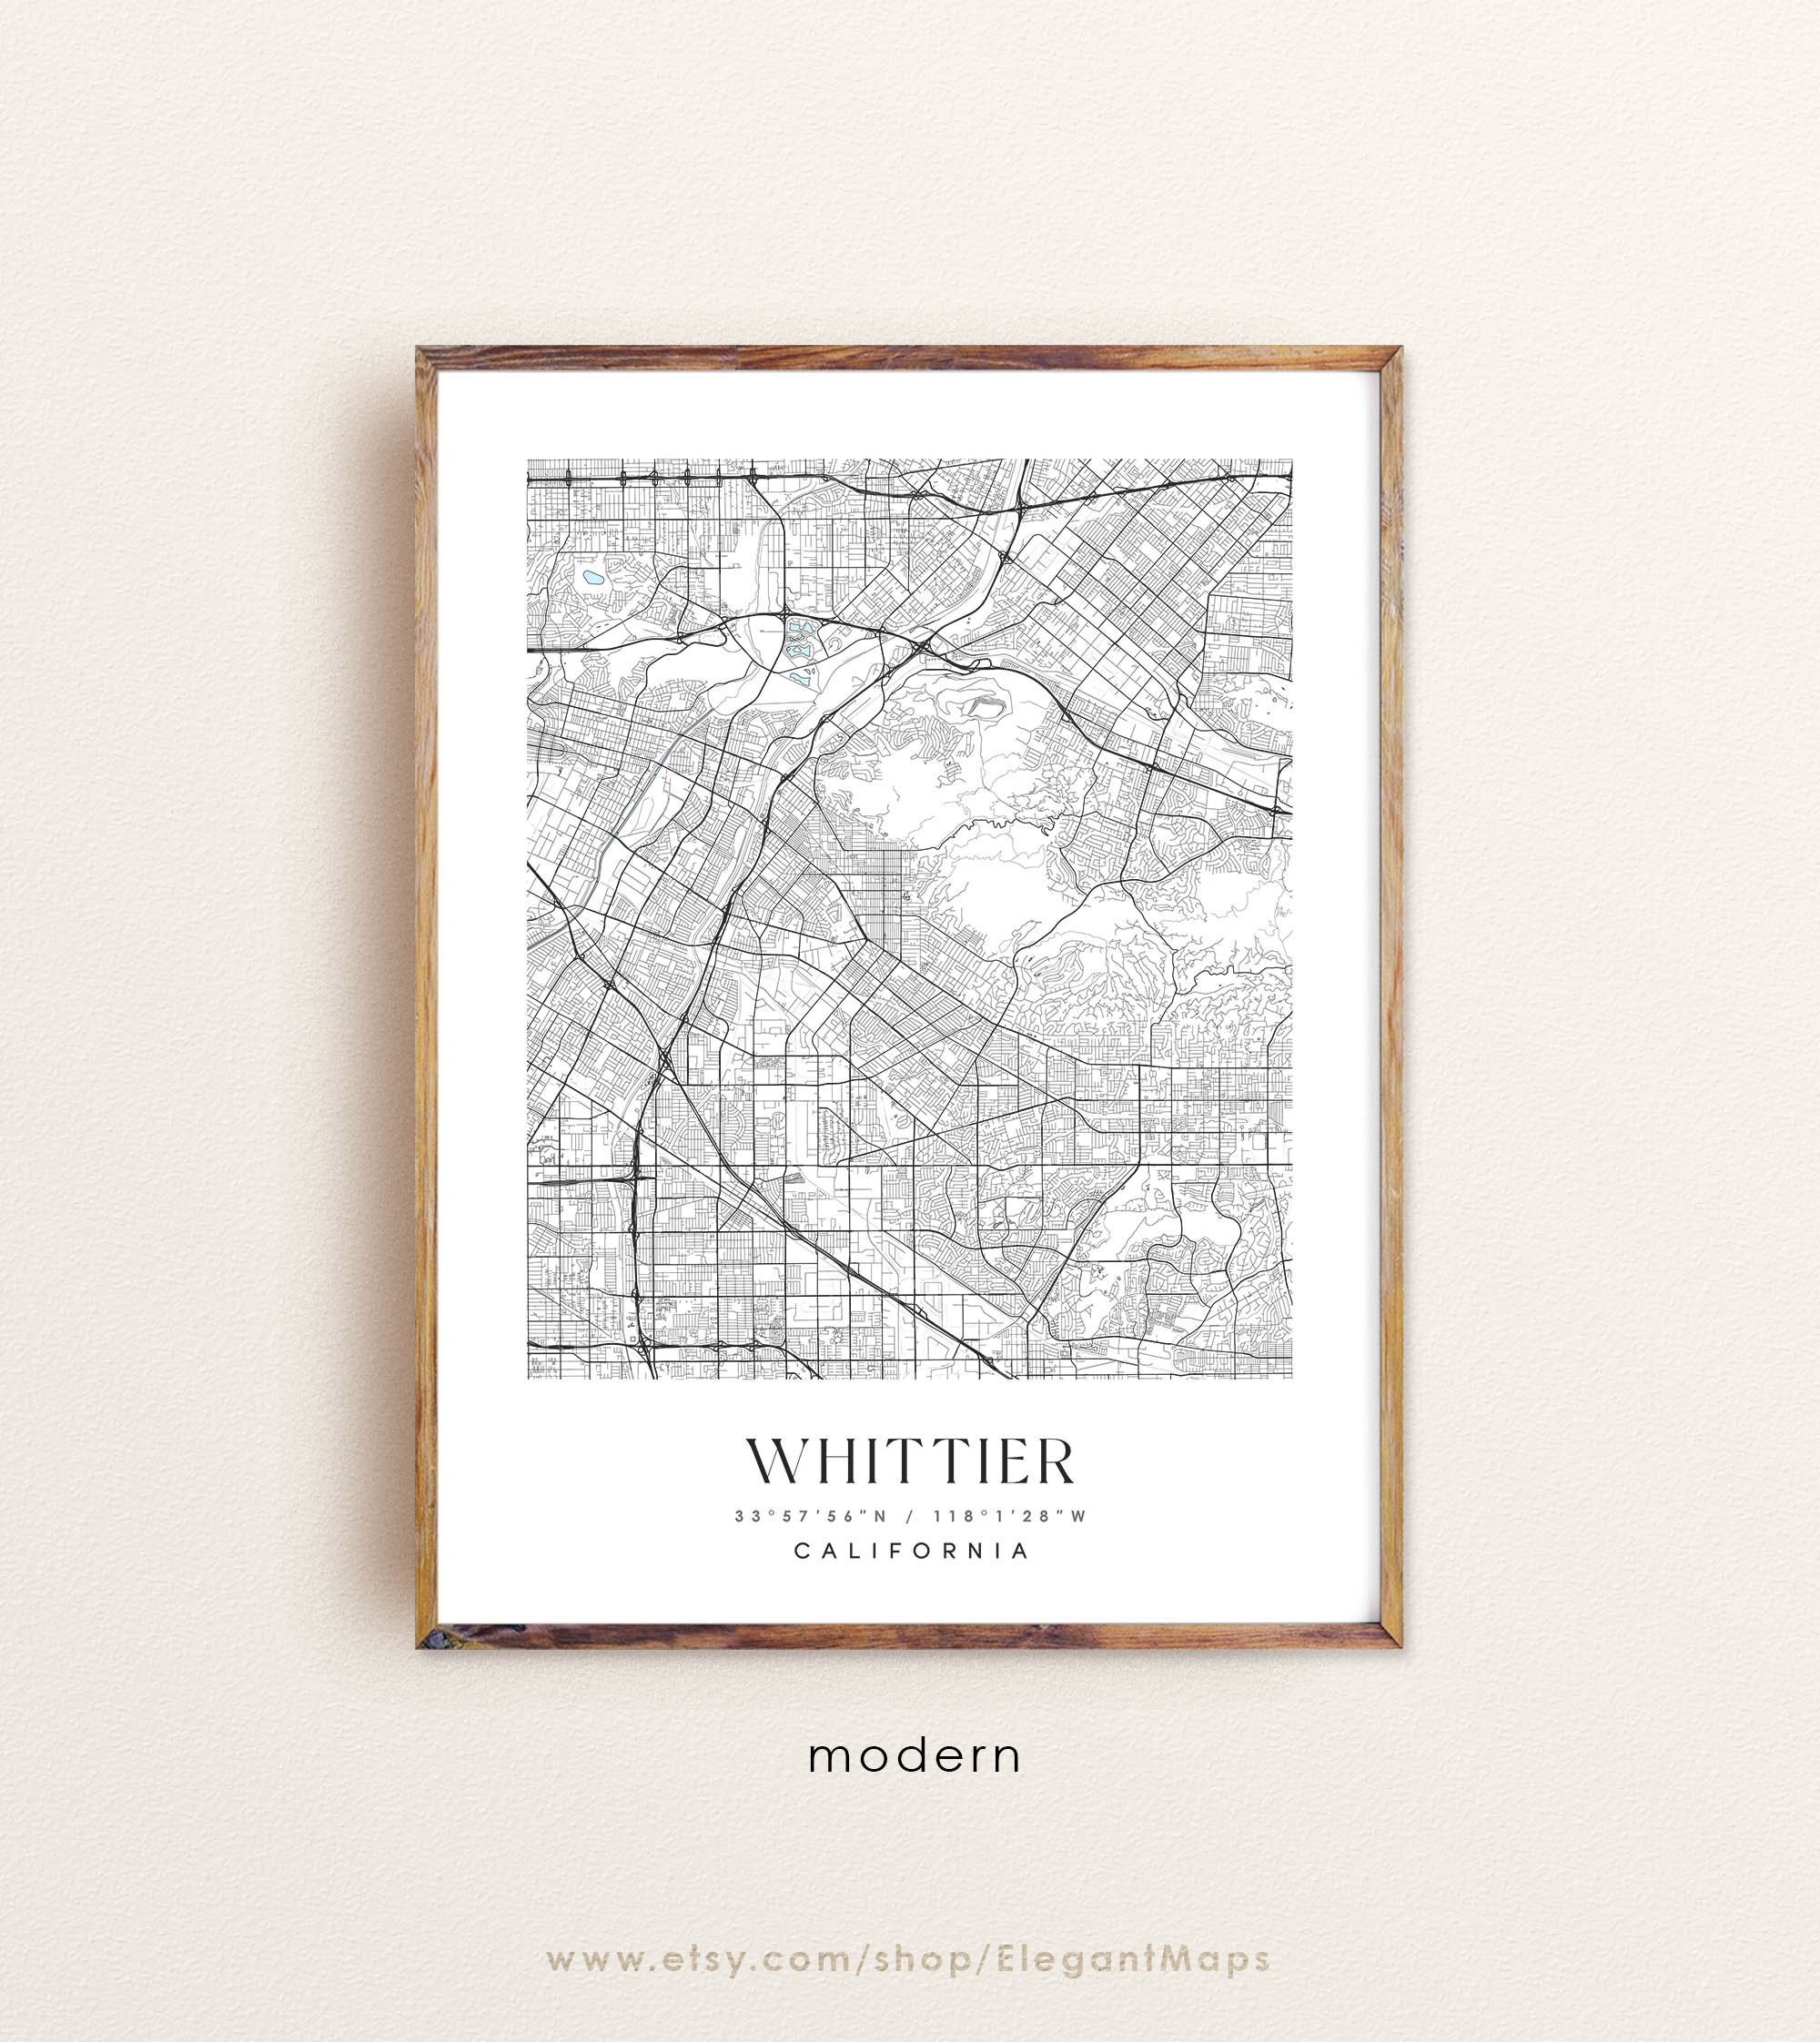 Whittier California Map Whittier CA Map Whittier City Print picture image